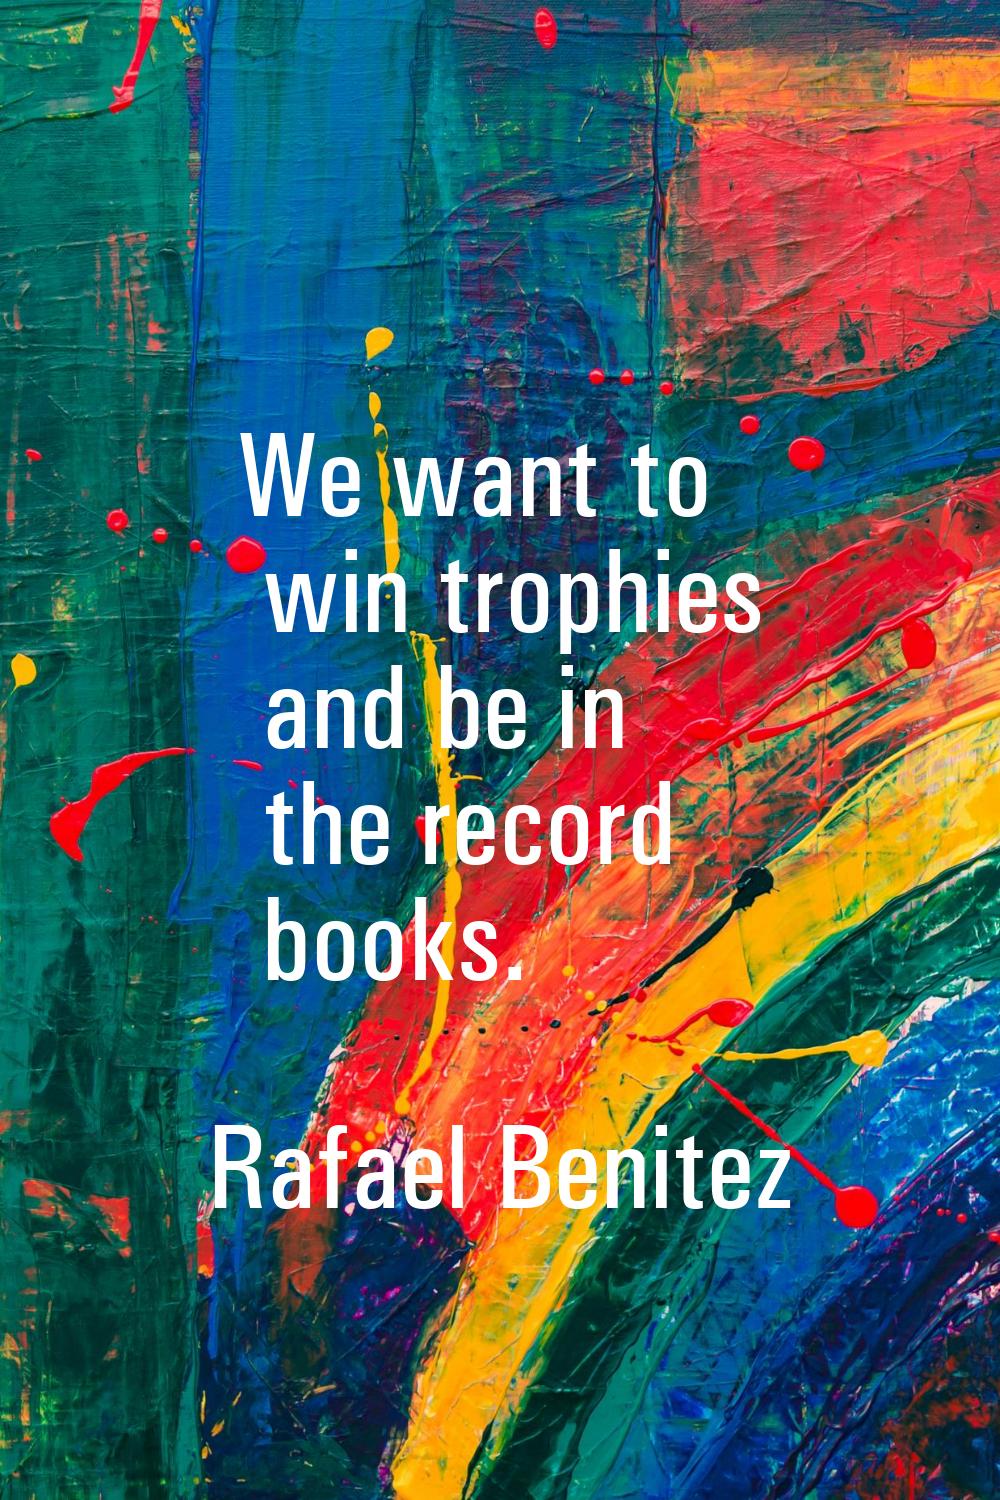 We want to win trophies and be in the record books.